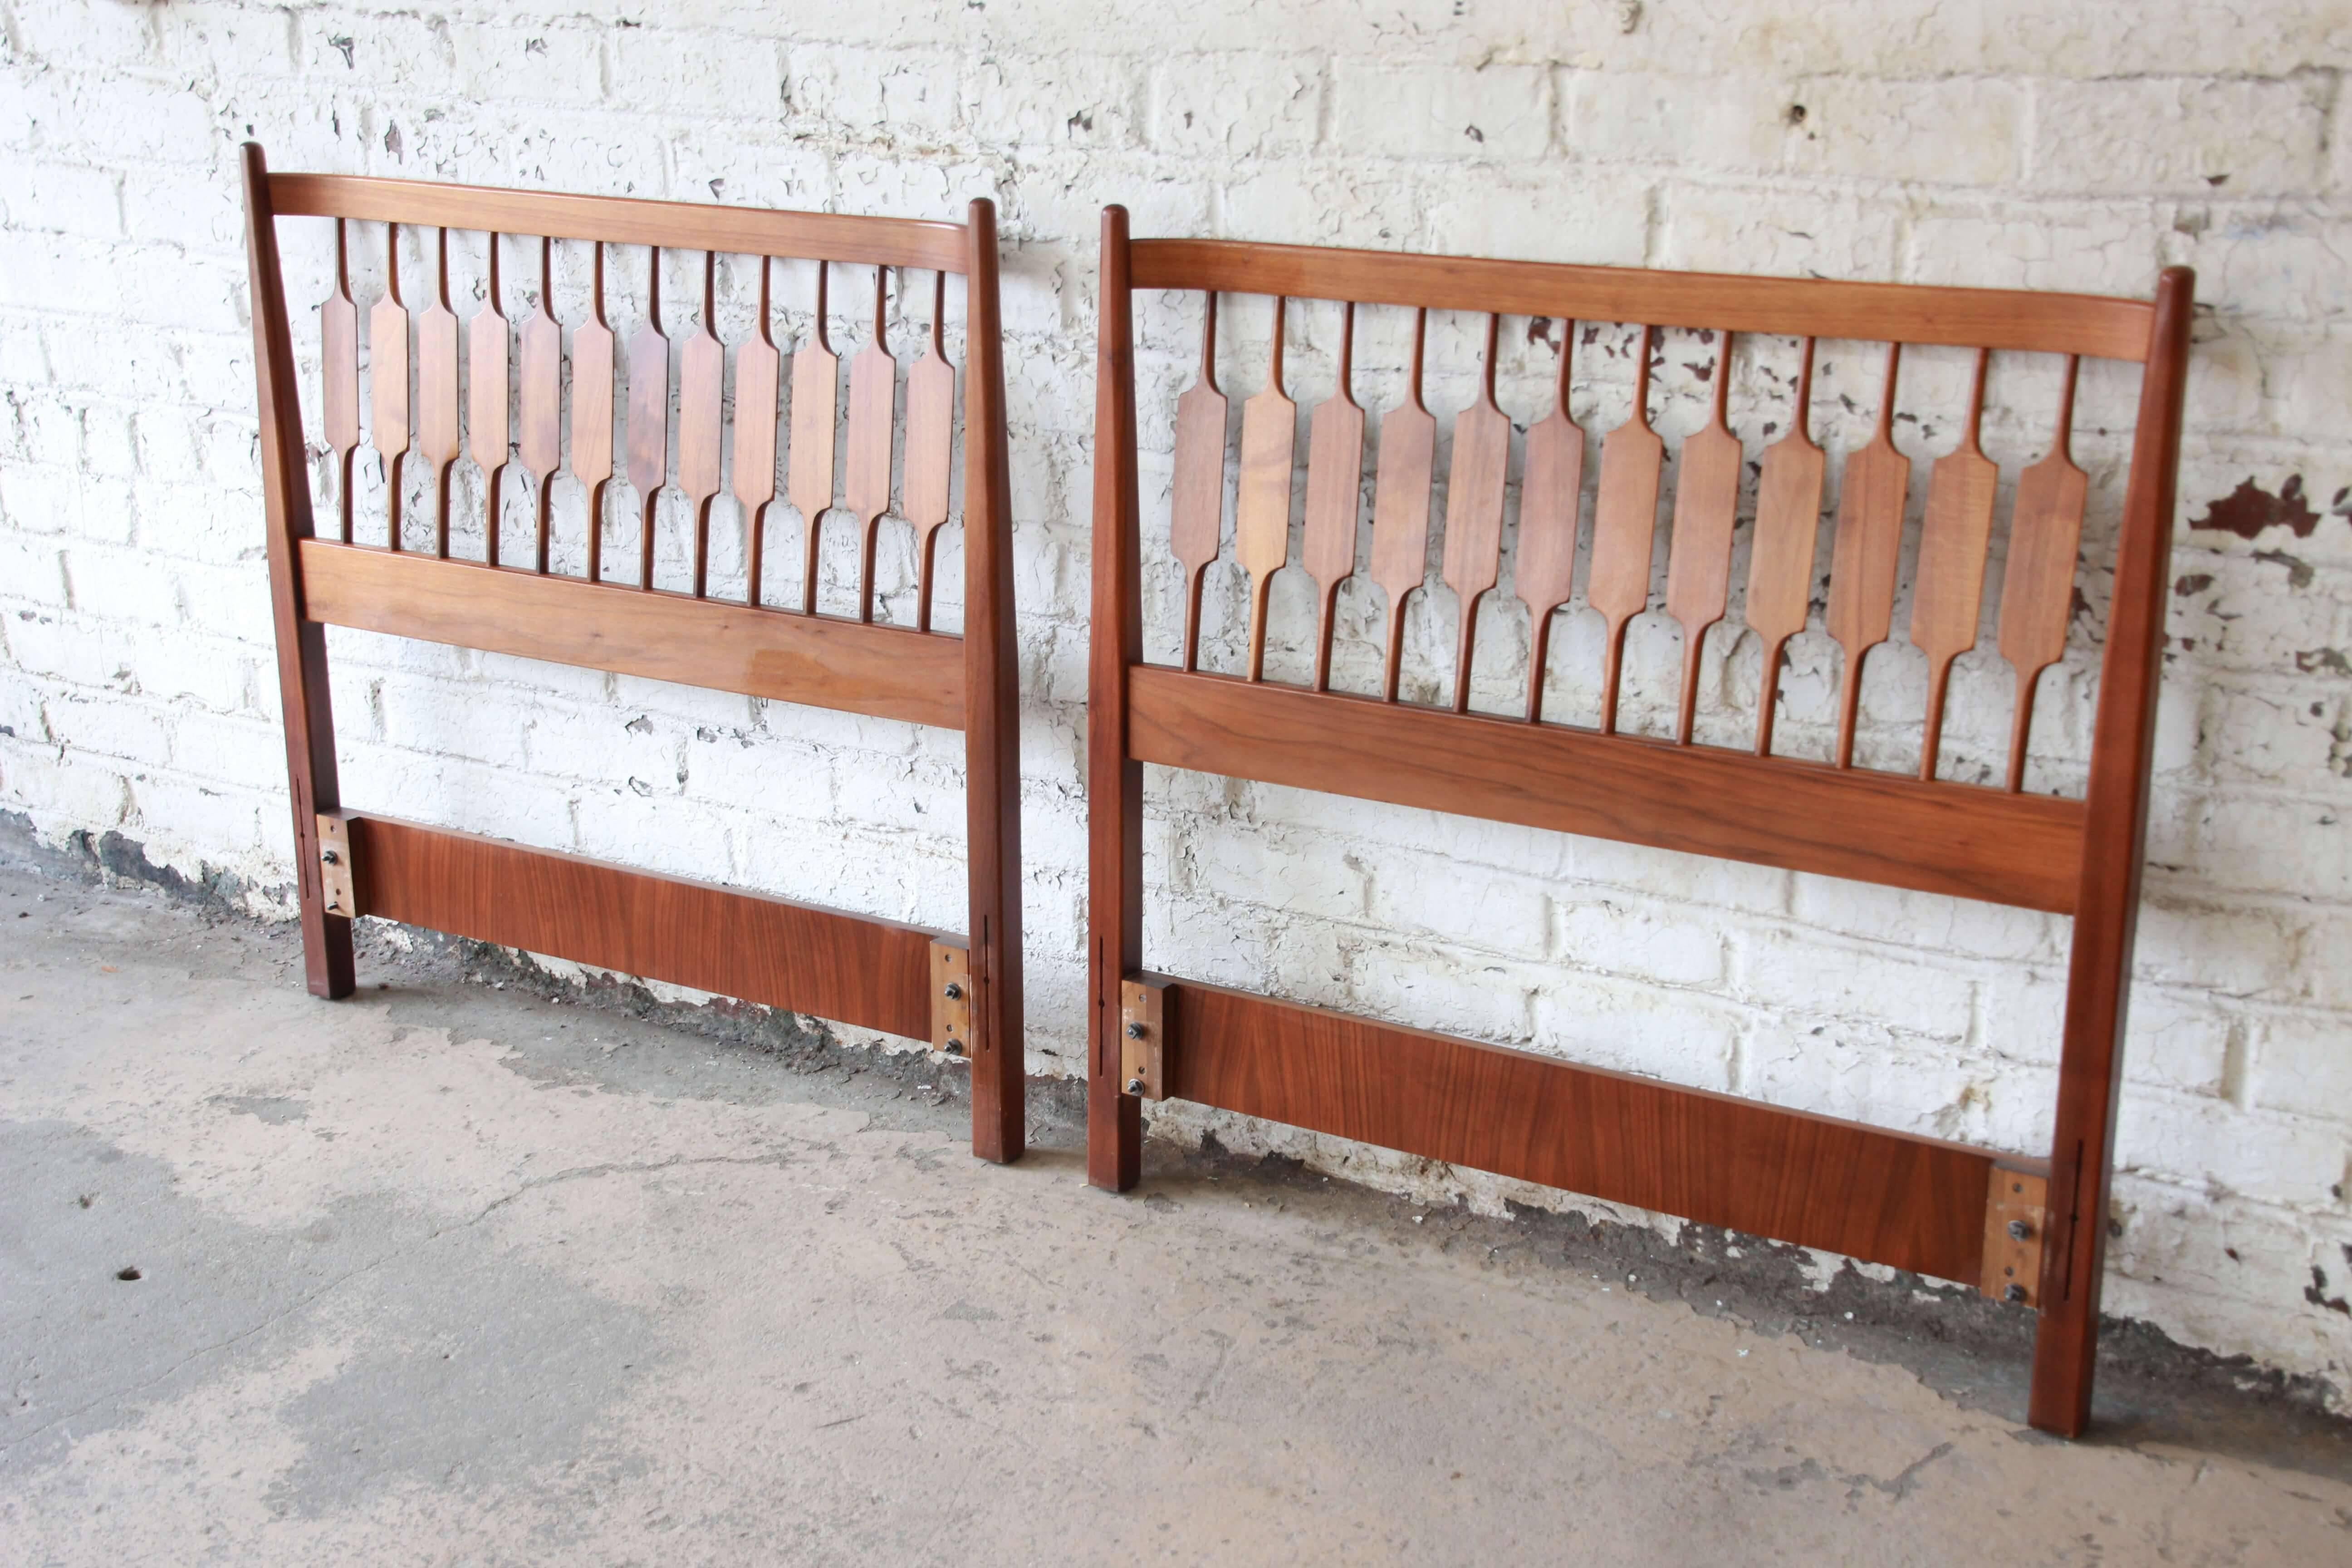 Offering a very nice pair of Kipp Stewart for Drexel Declaration Mid-Century Modern twin headboards. This set is made from solid walnut and has a fantastic walnut wood grain with modern spindle design. Great addition to any modern bedroom. The